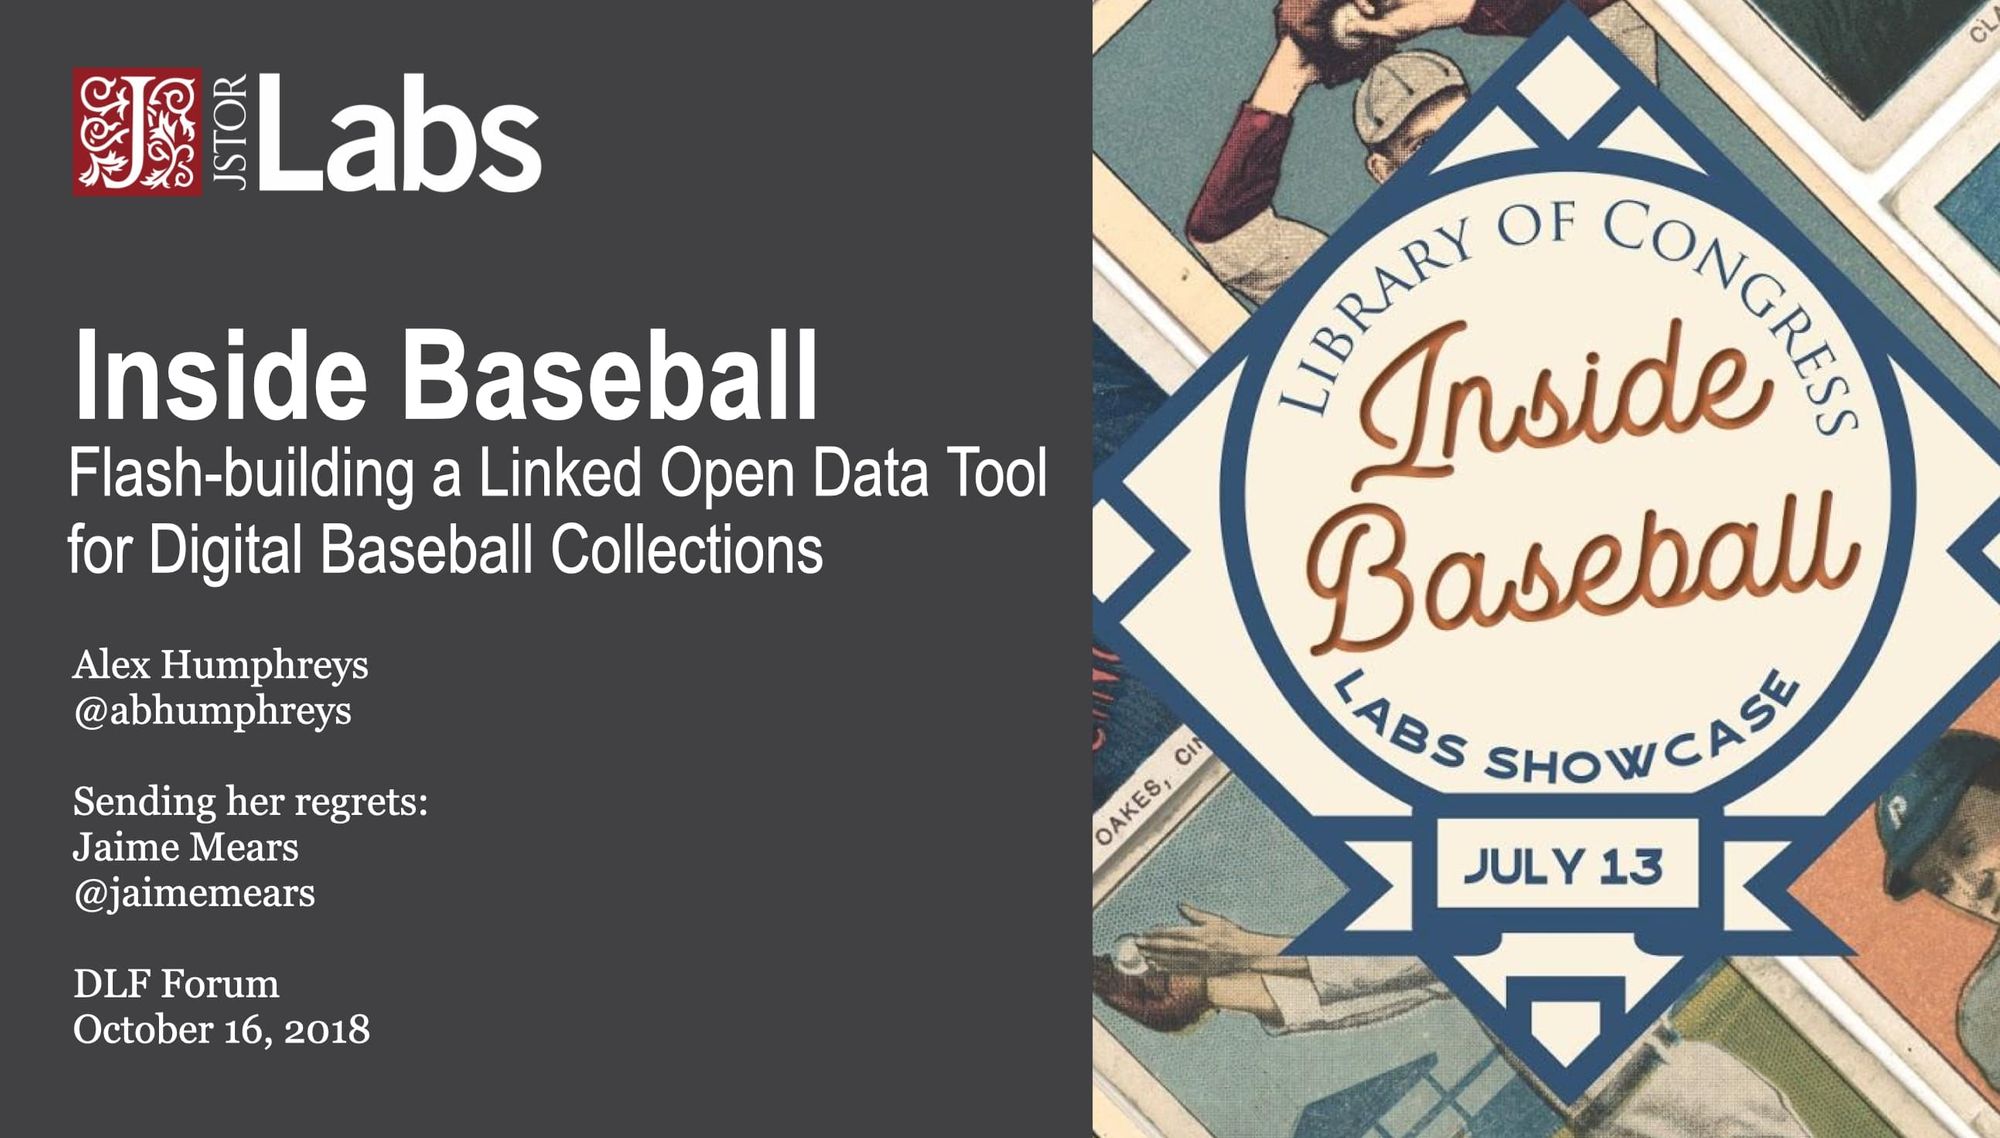 Playing Ball: Flash-building a Linked Open Data Tool for Digital Baseball Collections